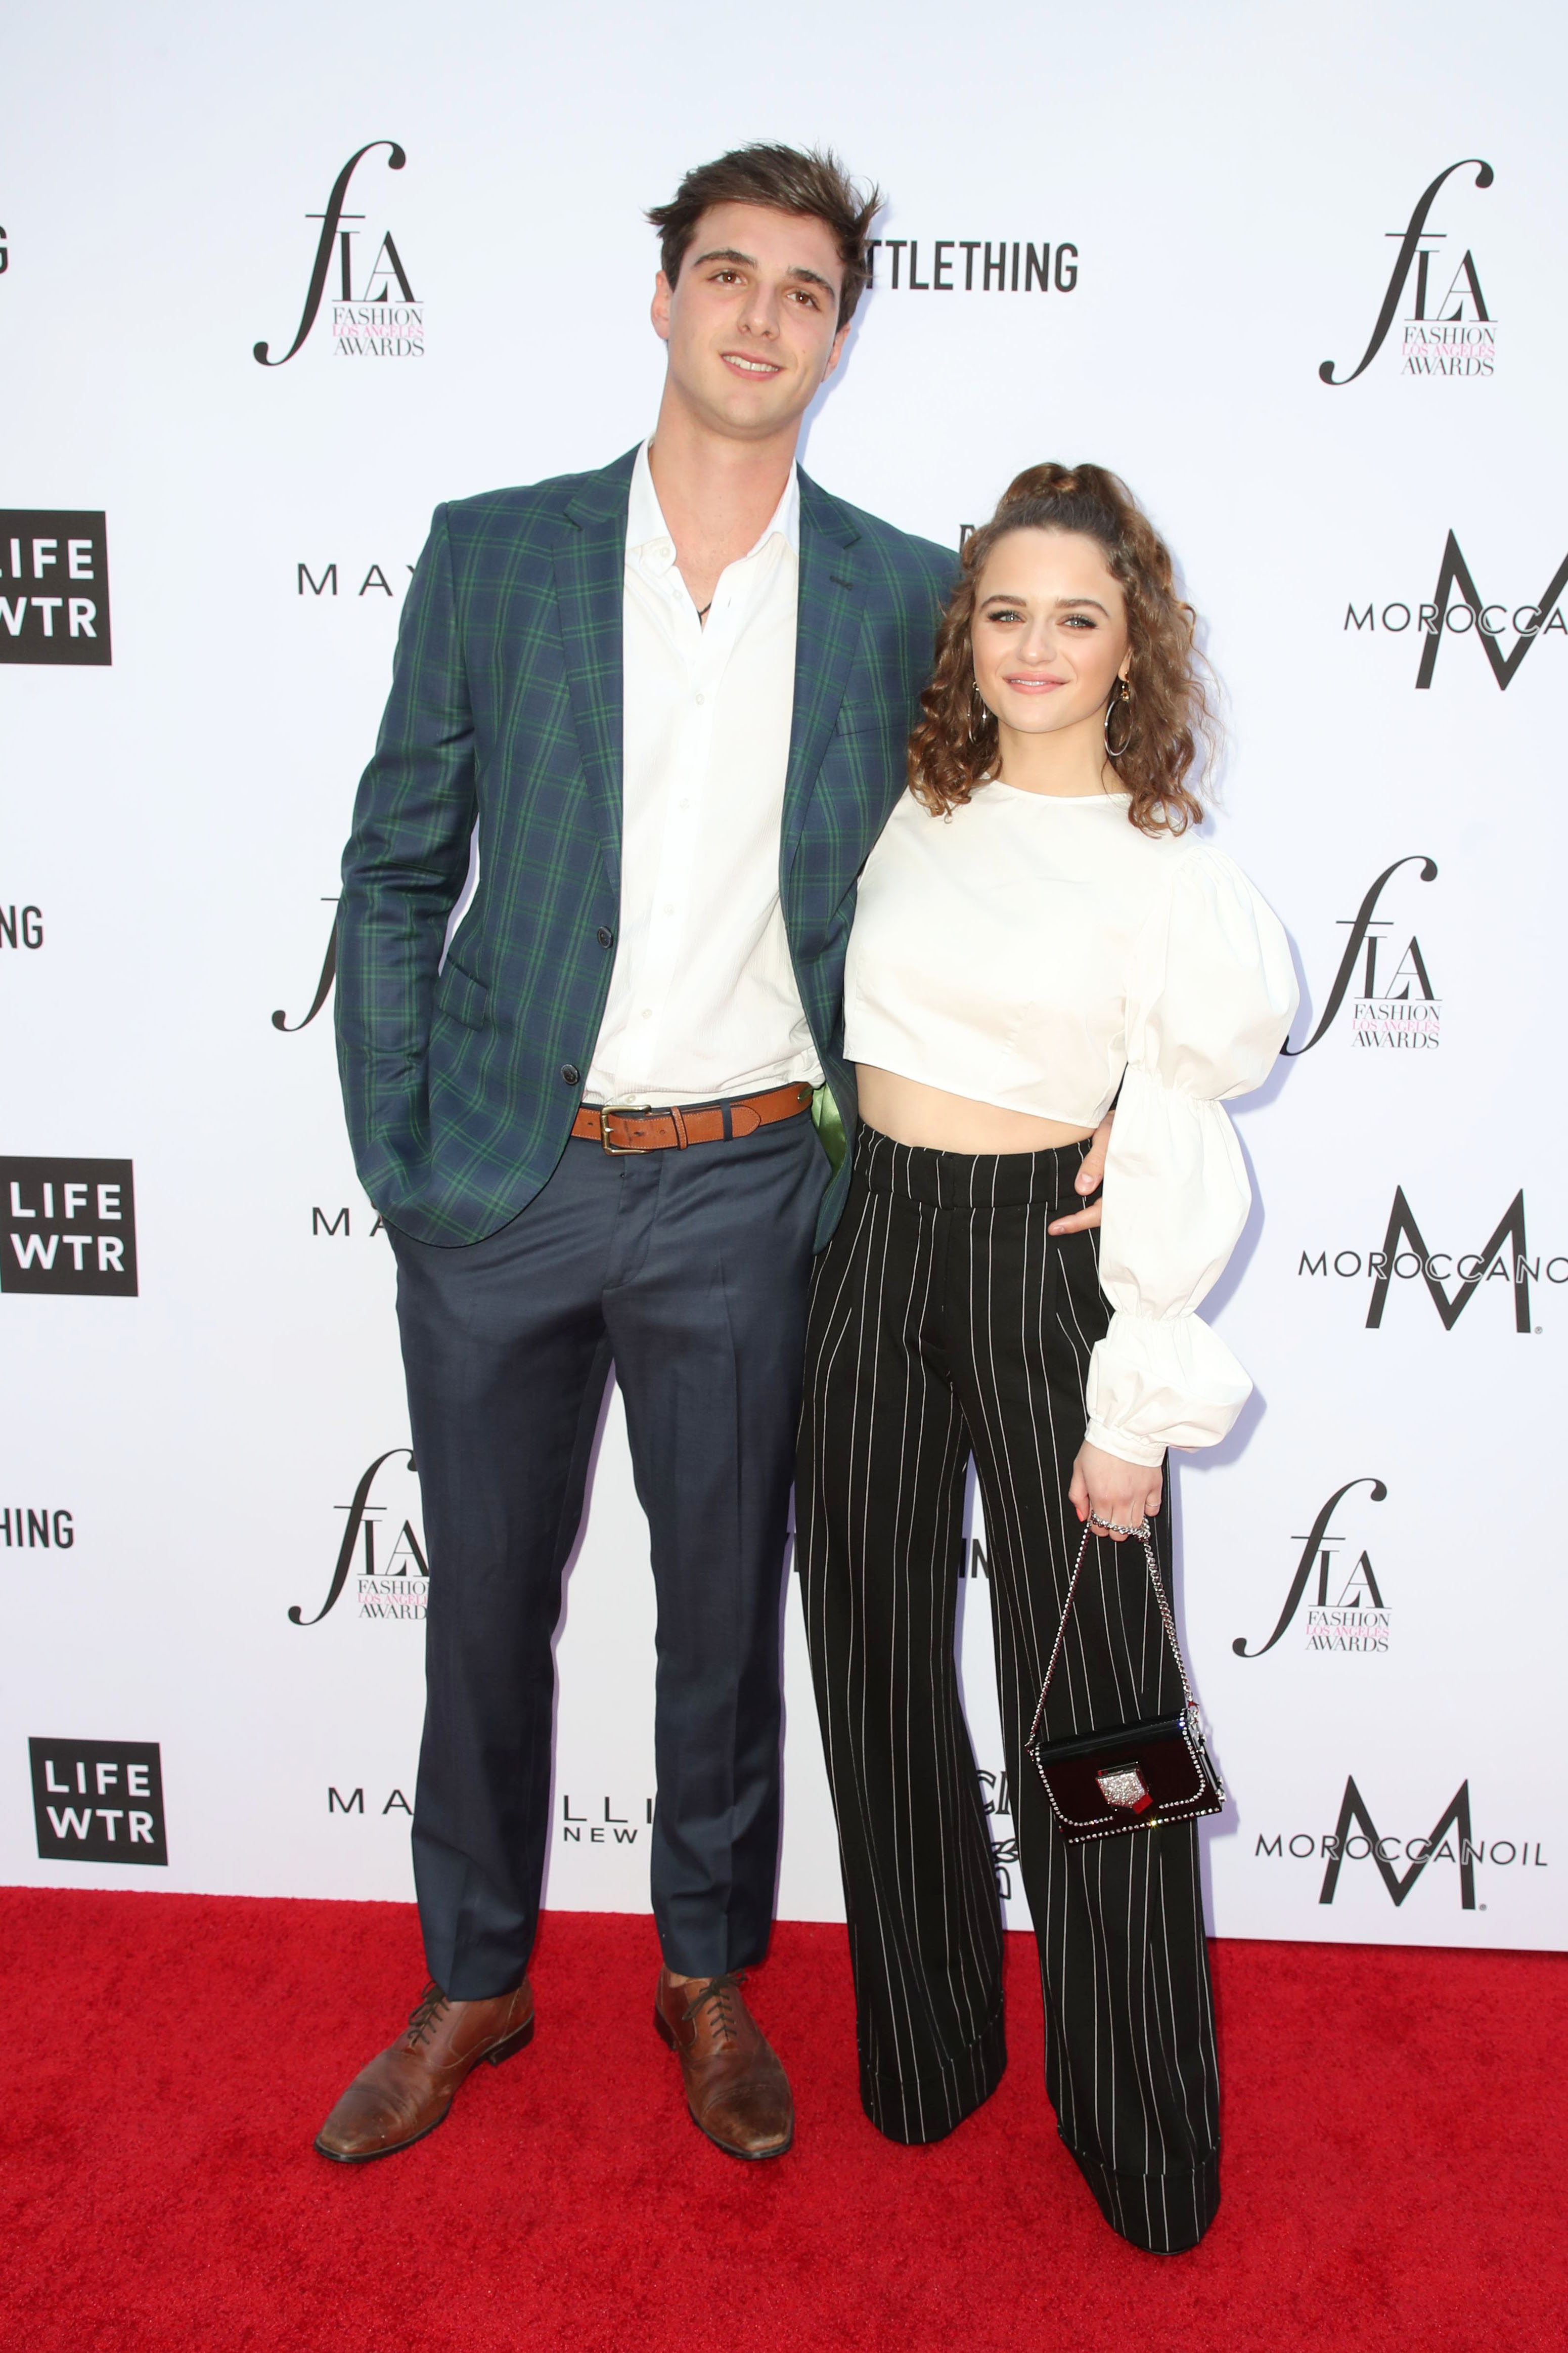 Celebrity Couples With Major Height Differences: Photos